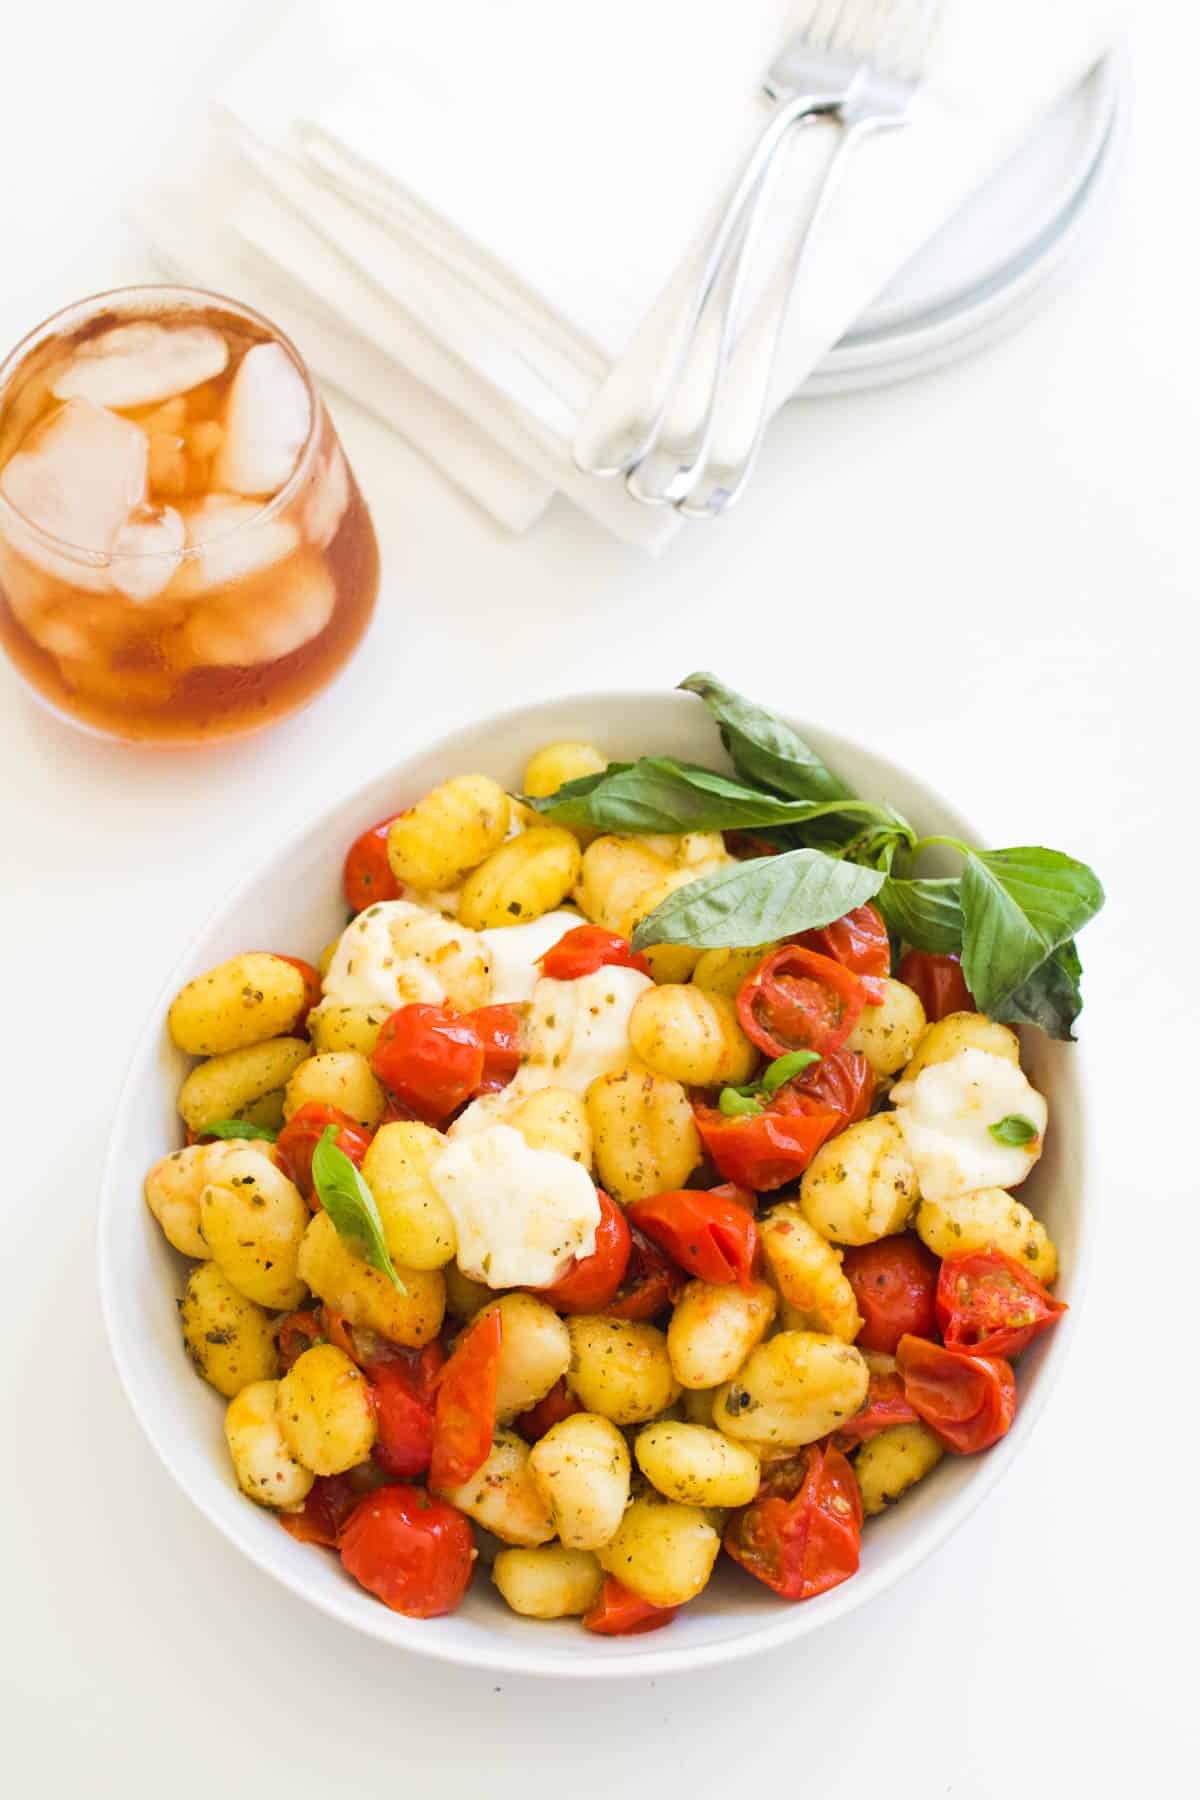 A bowl of gnocchi caprese on a table next to a glass of iced tea.